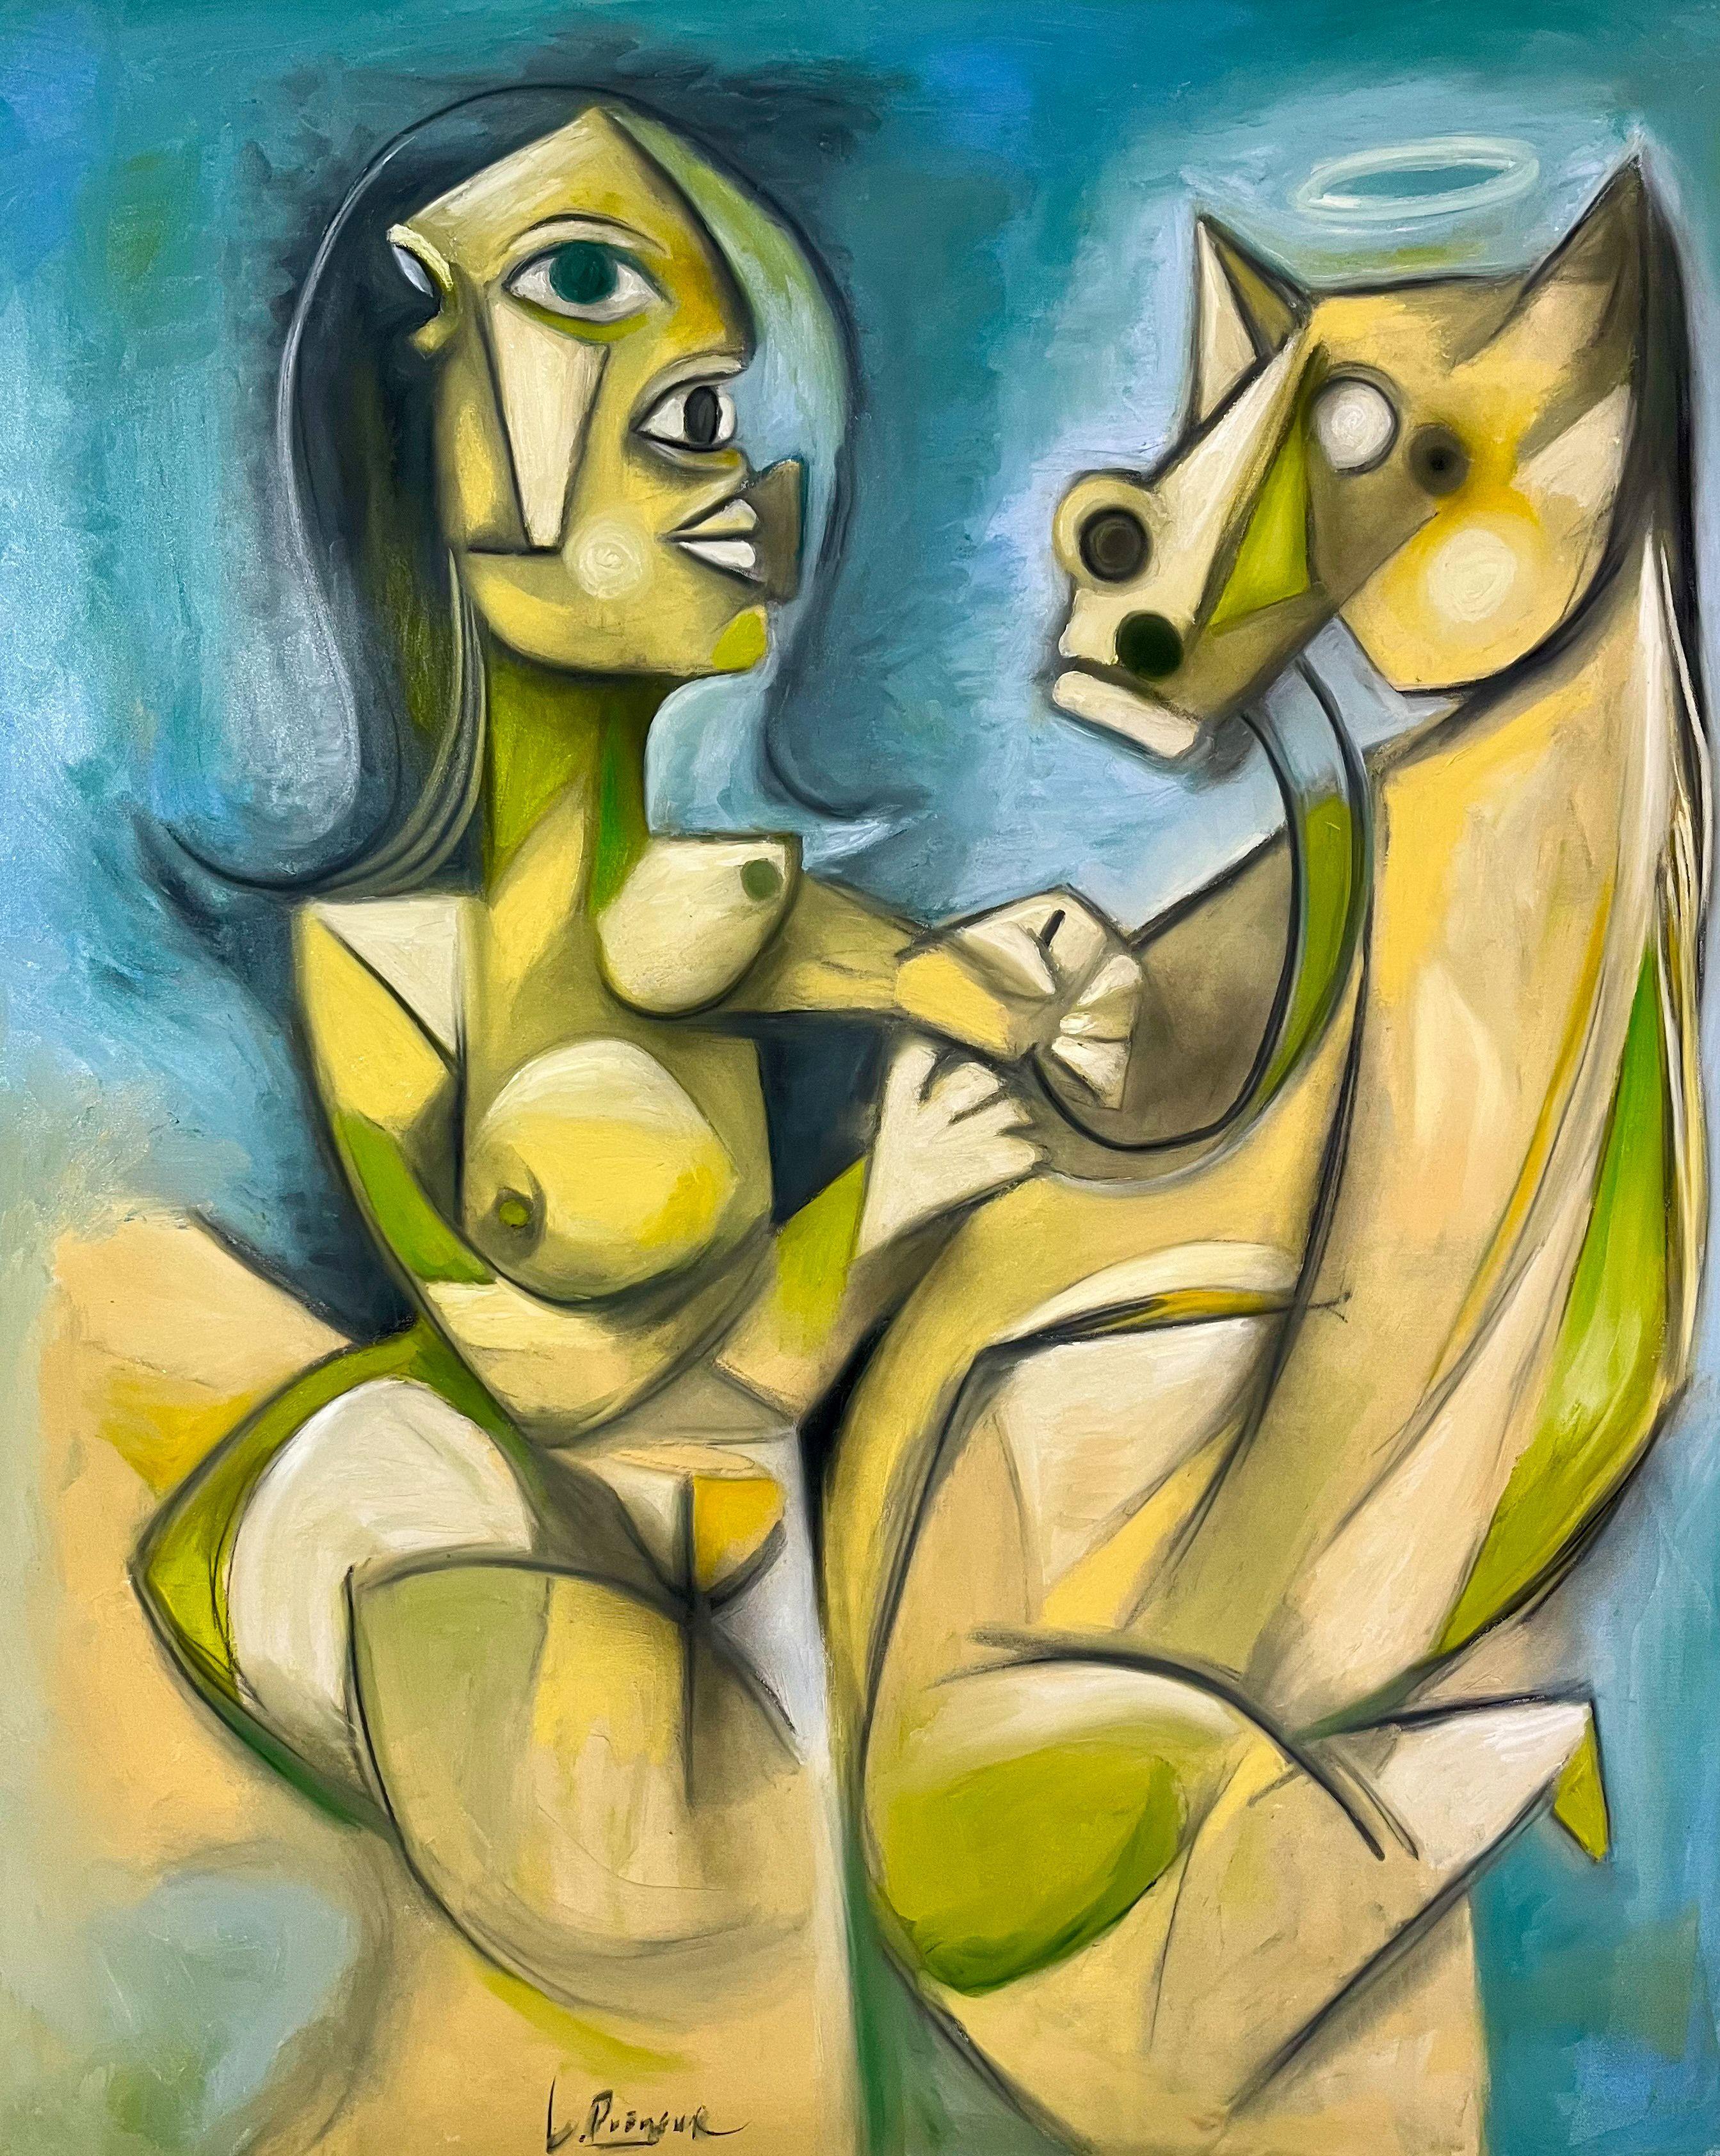 Hand in hand, hearts entwined,  Companionship, a treasure defined.  Through stormy seas or sunny skies,  Together, we face life's highs and sighs.  In laughter, tears, joys we share,  A bond unbreakable, love's affair. :: Painting :: Cubism :: This